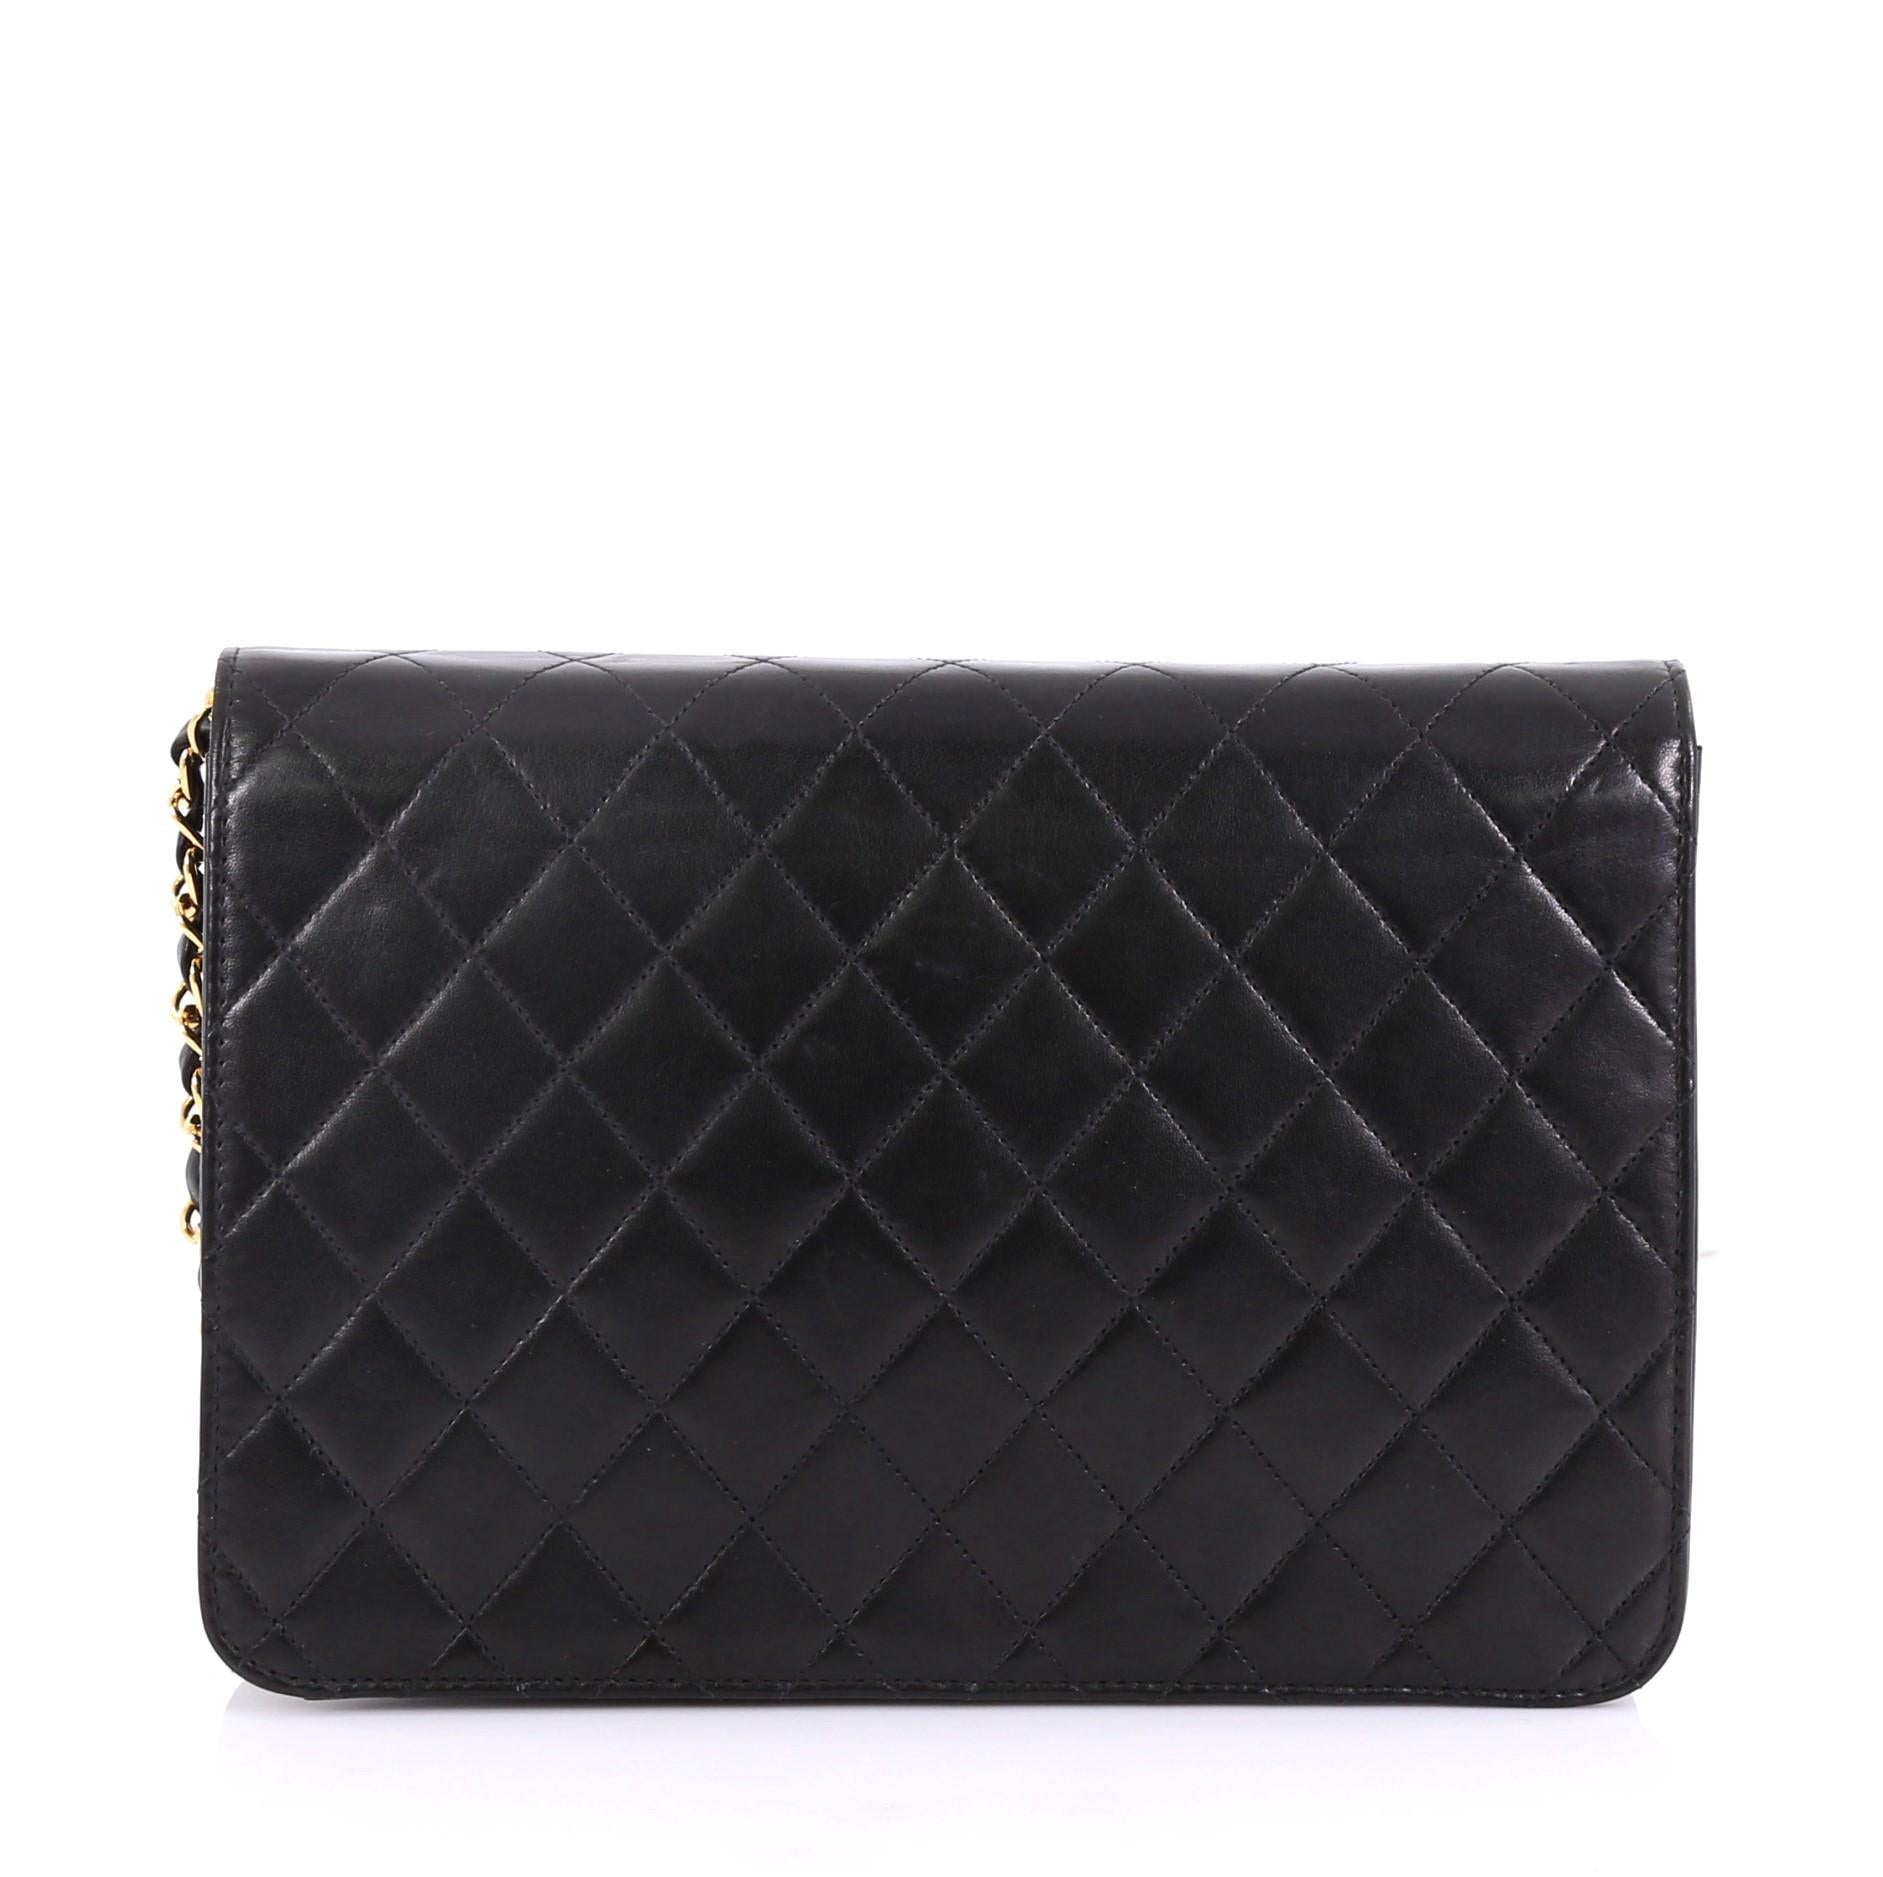 Black Chanel Vintage Clutch with Chain Quilted Leather Medium